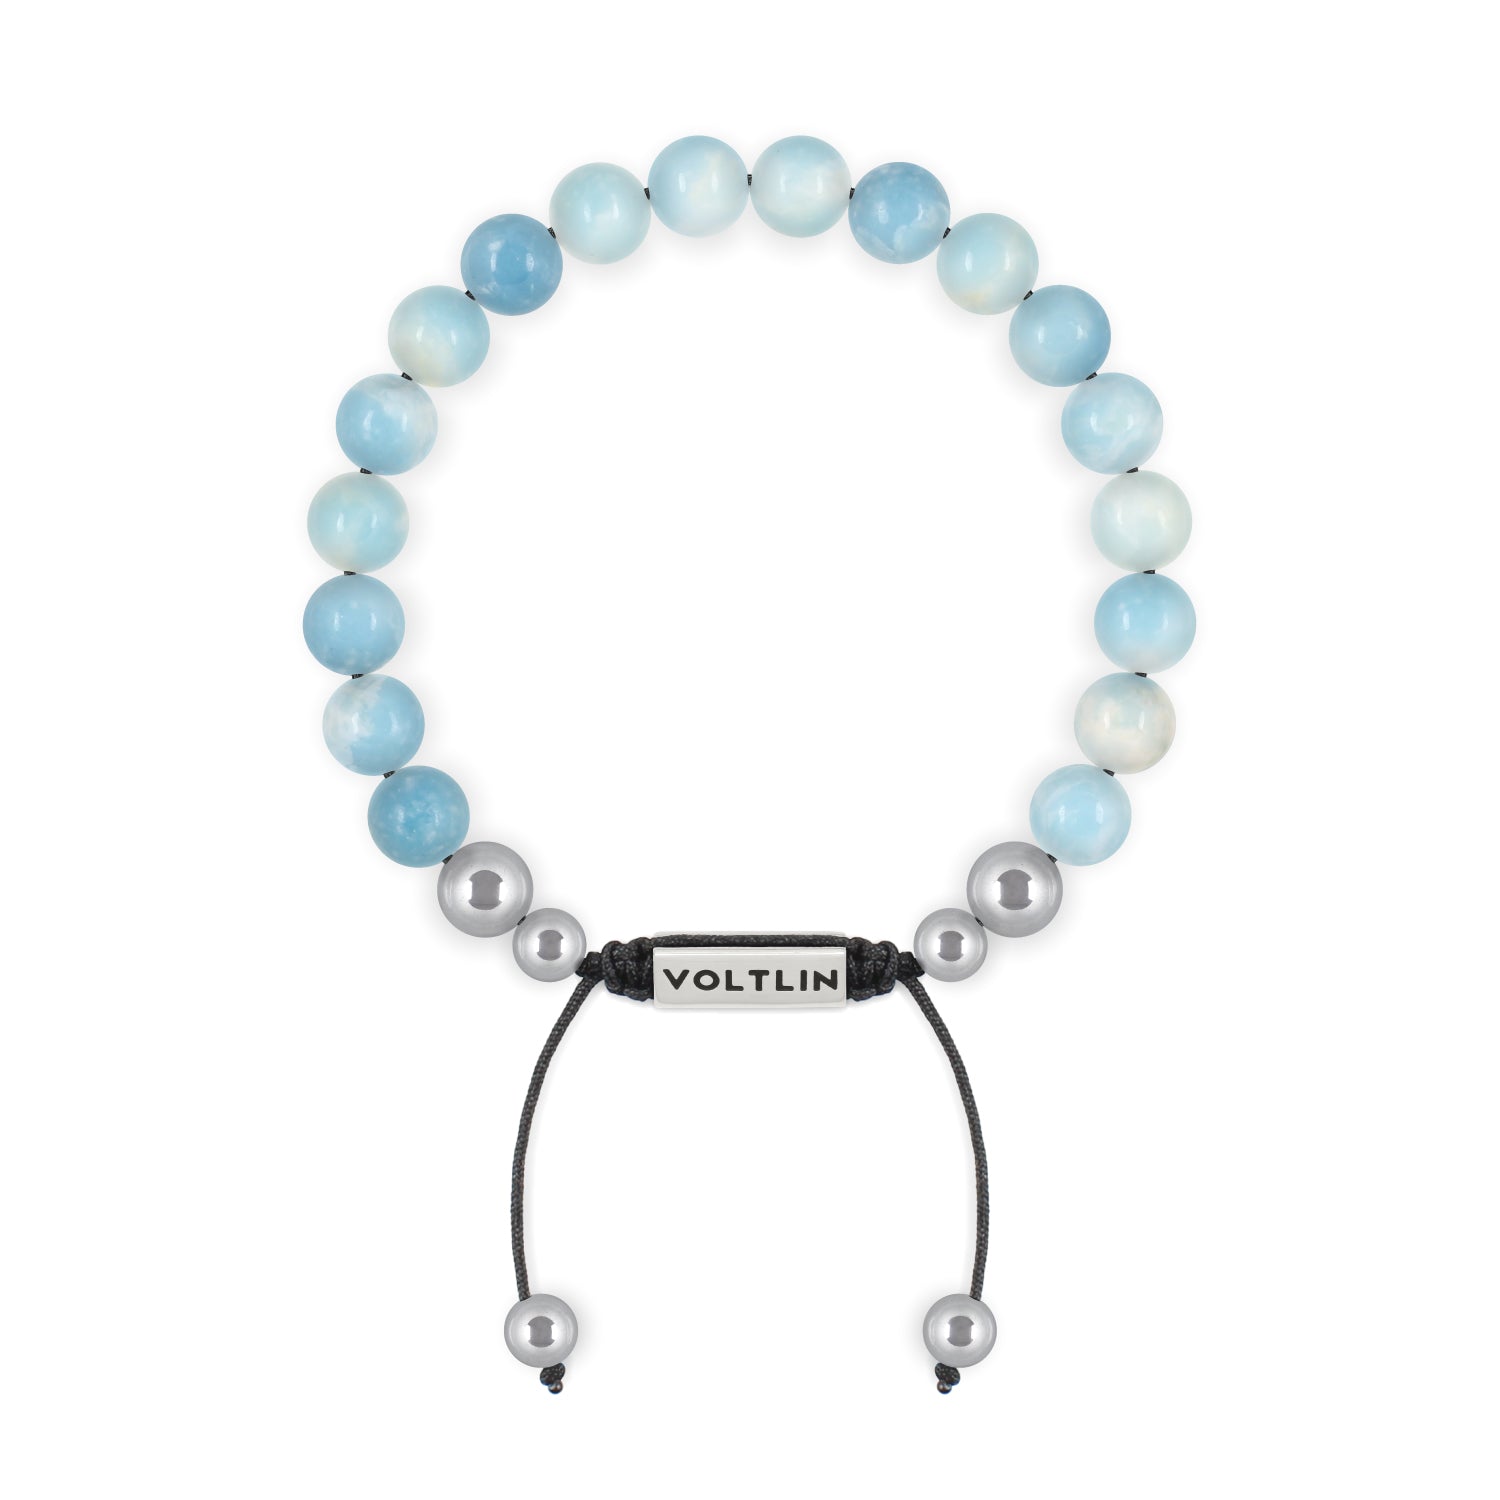 Front view of an 8mm Larimar beaded shamballa bracelet with silver stainless steel logo bead made by Voltlin